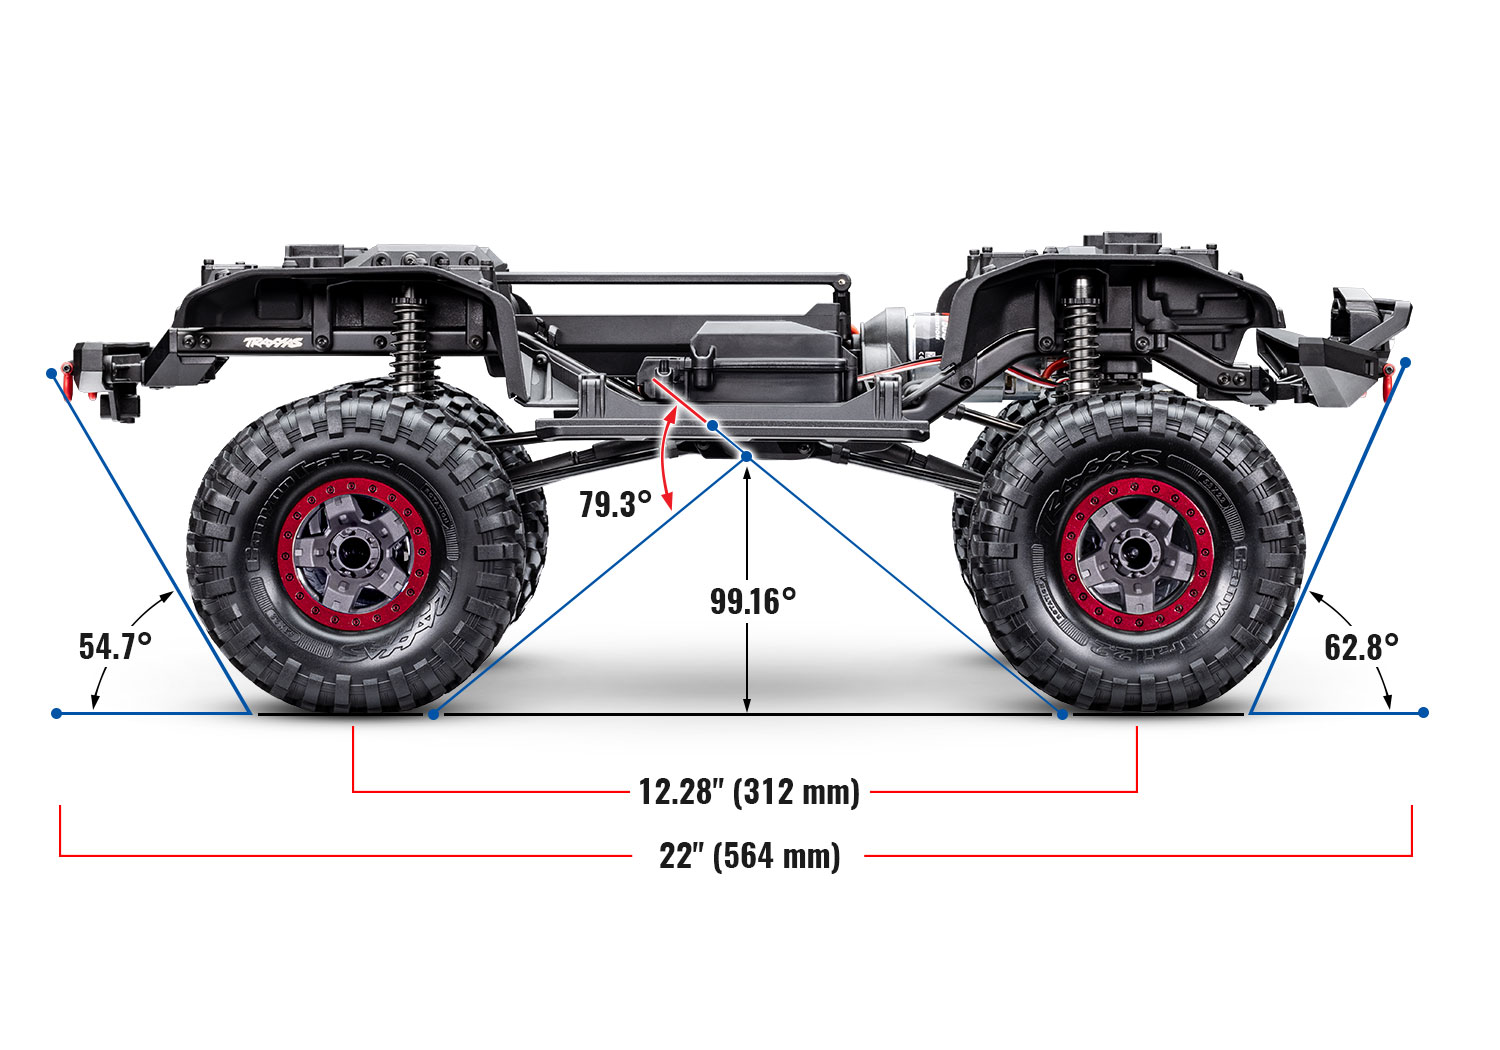 PACK ECO 100% RTR TRX-4 SPORT HIGH TRAIL ROUGE LIPO 3S 4000 MAH CHARGEUR TRAXXAS SAC OFFERT